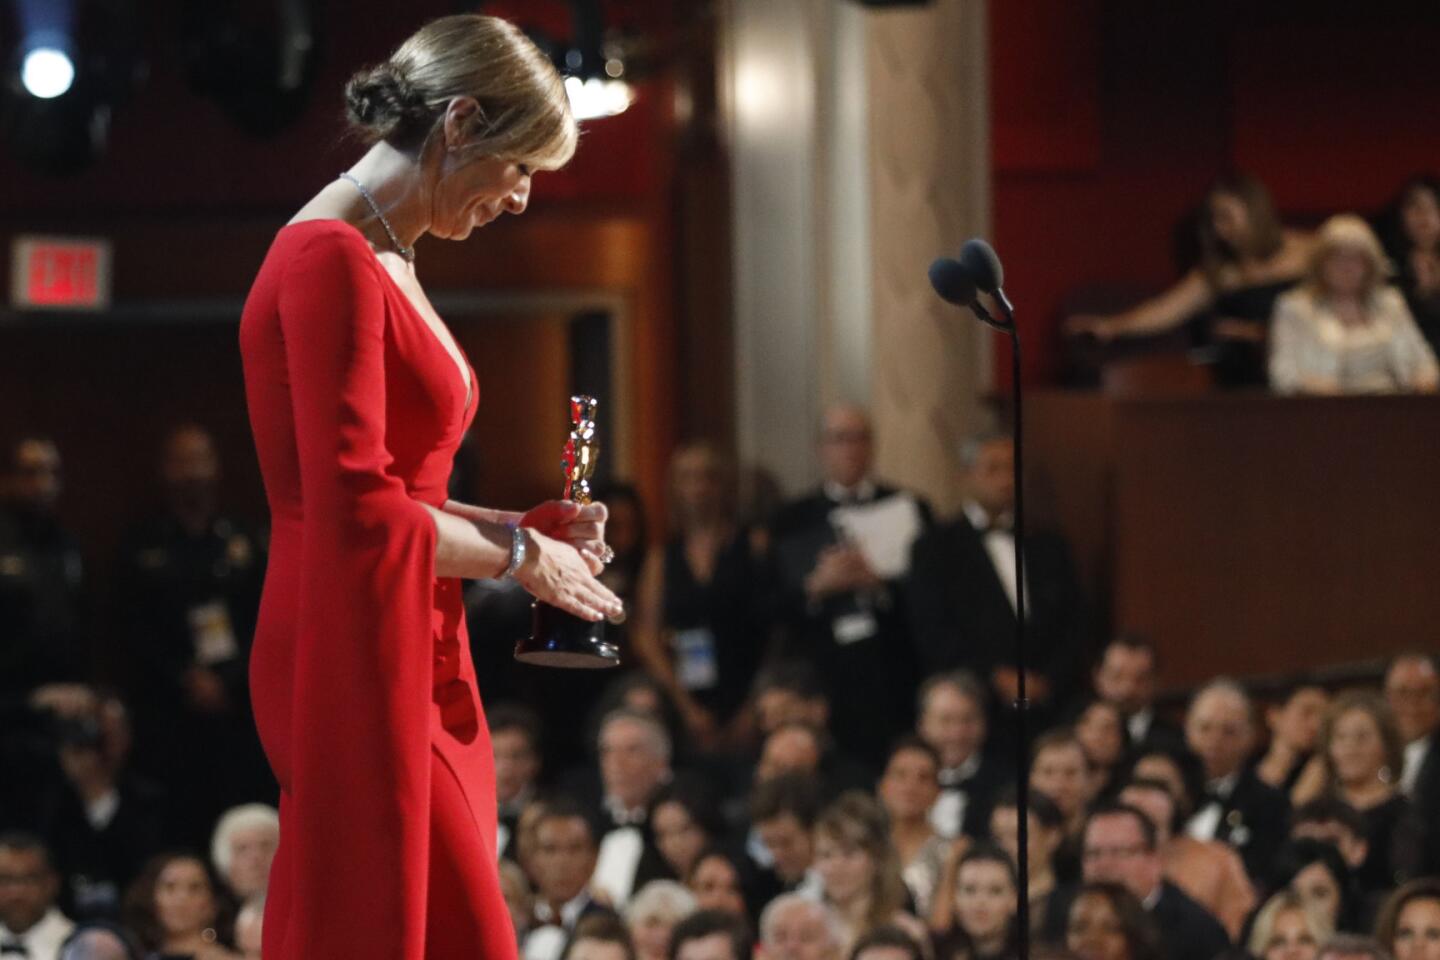 Allison Janney onstage after Janney won for best supporting actress for "I, Tonya," from backstage at the 90th Academy Awards on Sunday at the Dolby Theatre in Hollywood.